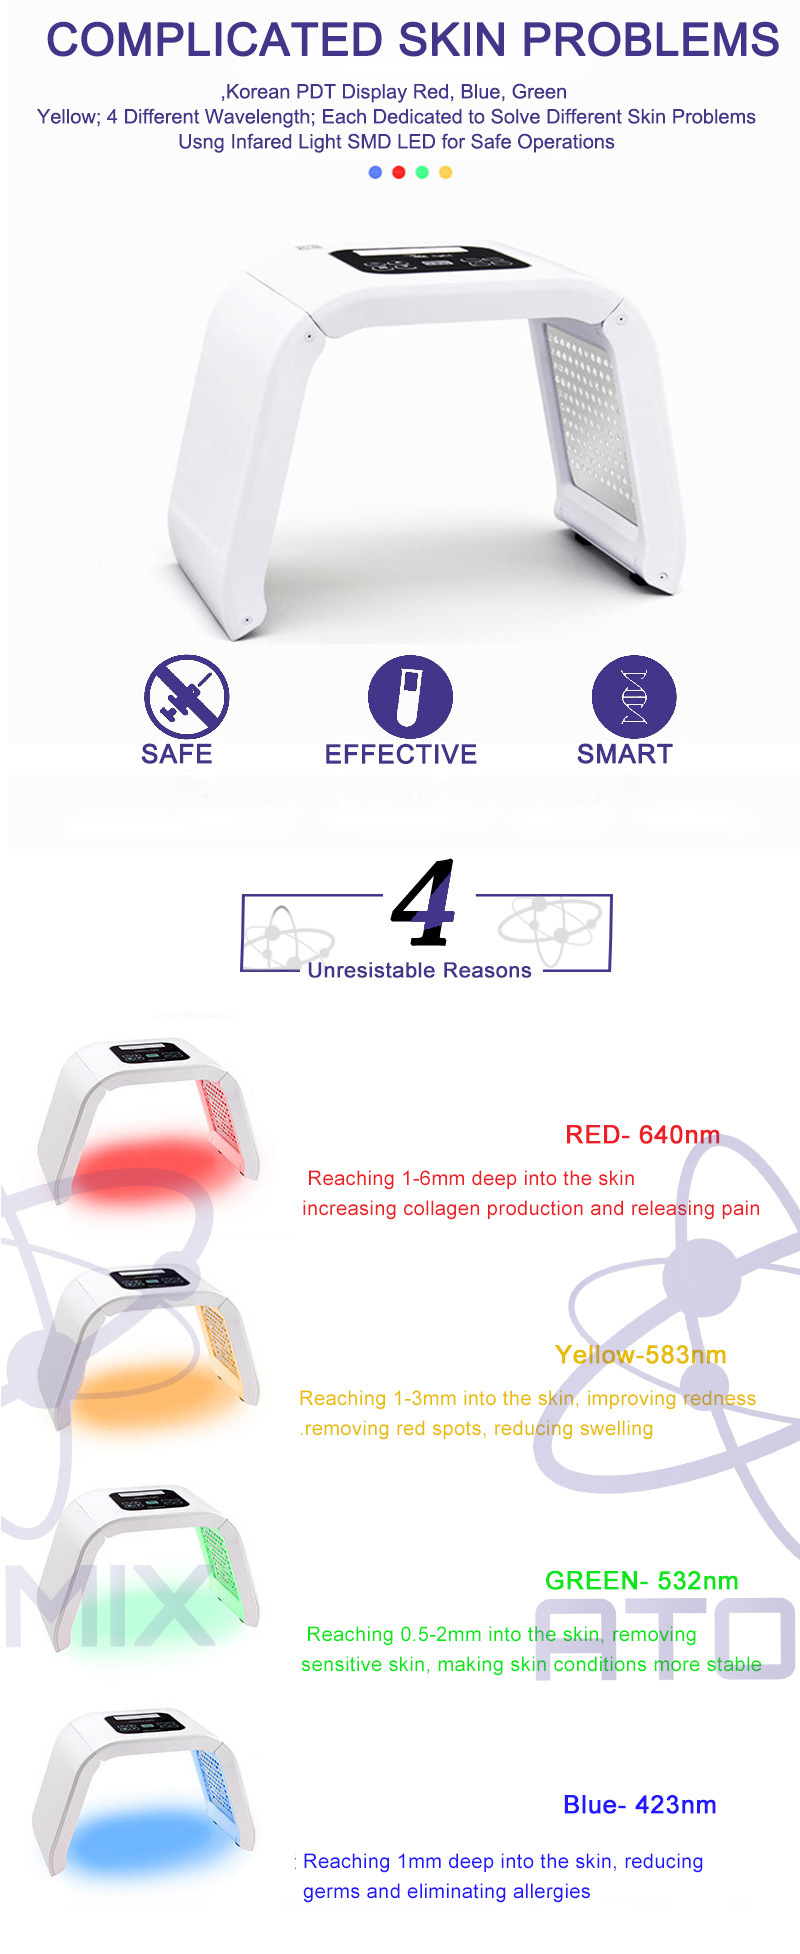 Super High Intensity LED Light for Skin Treatment Non-Surgical Highly Effective